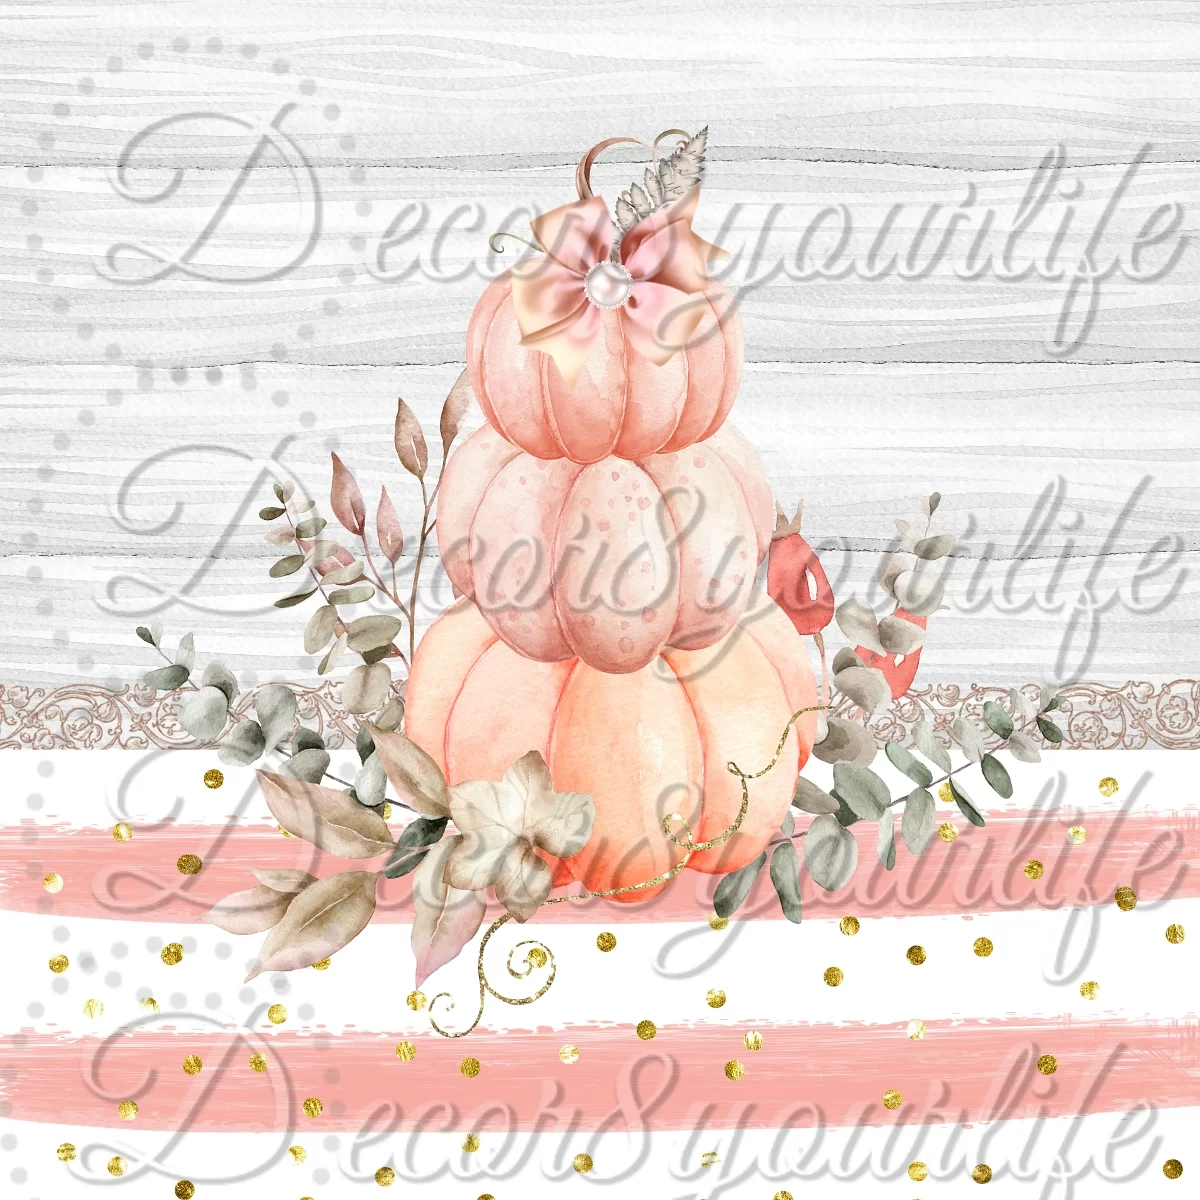 Vintage Shabby Chic Scrapbook Paper Collection